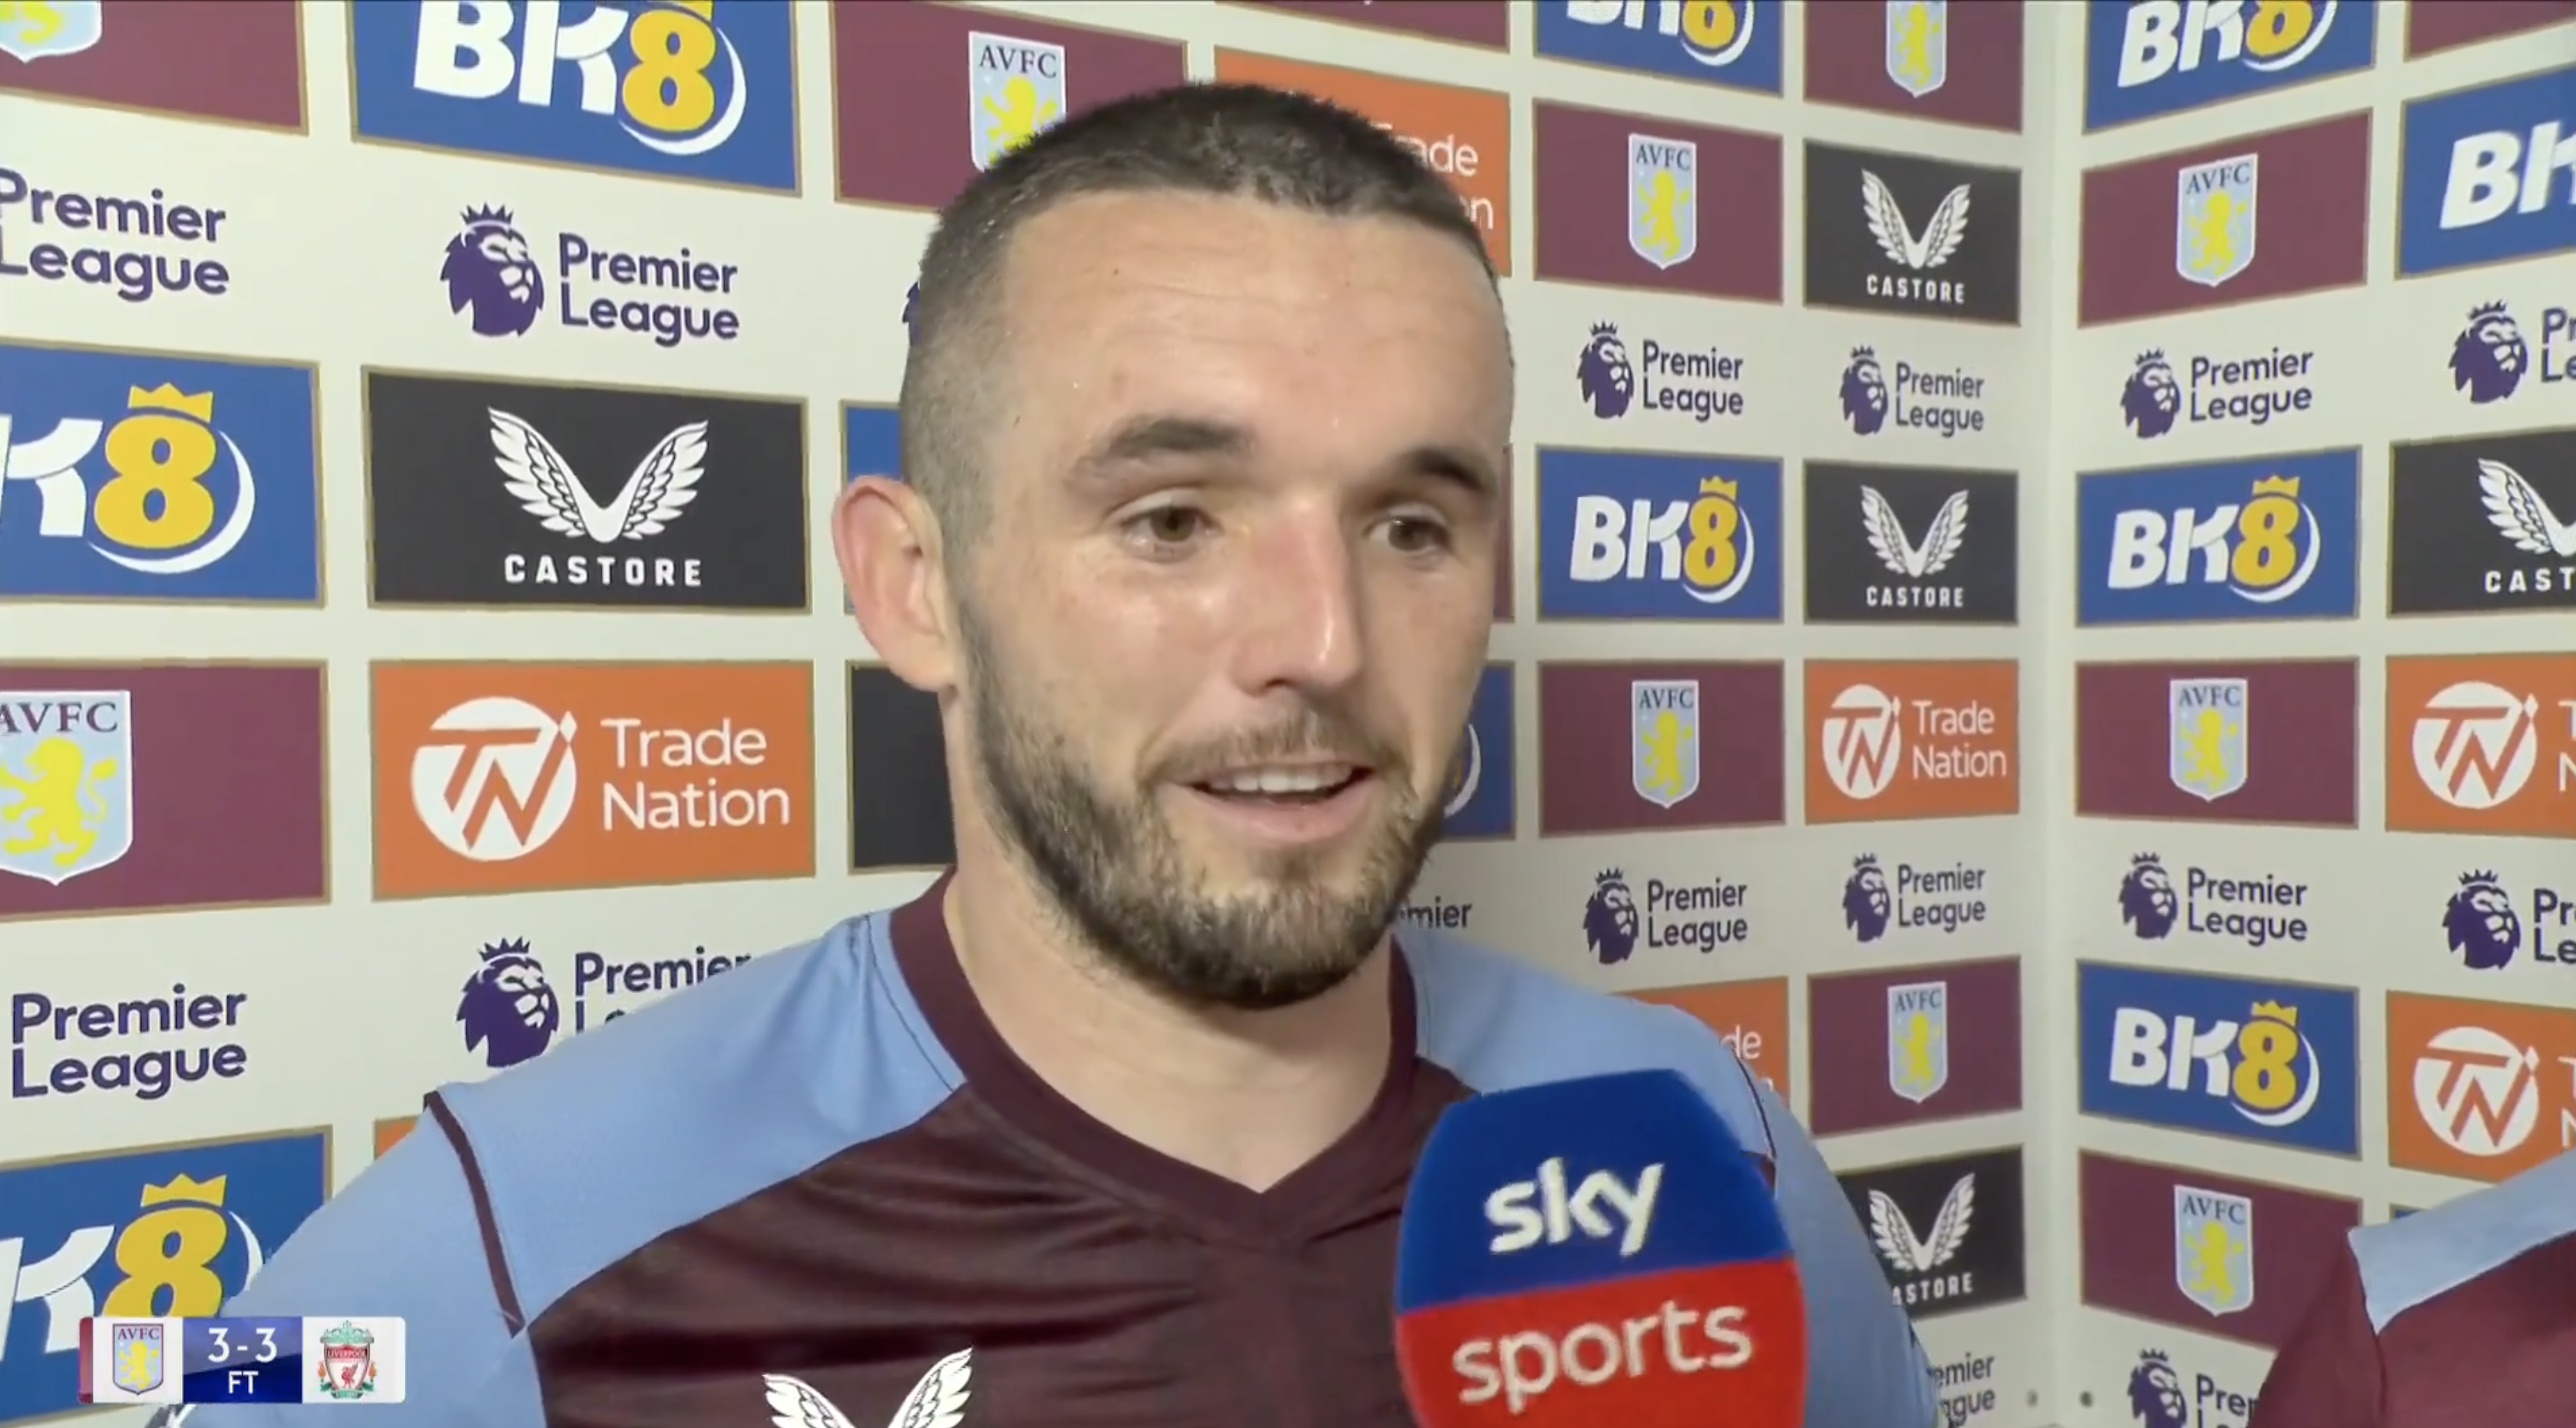 “We’ll have City tops on” – John McGinn wants Spurs to slip up with Villa on the brink of top four finish